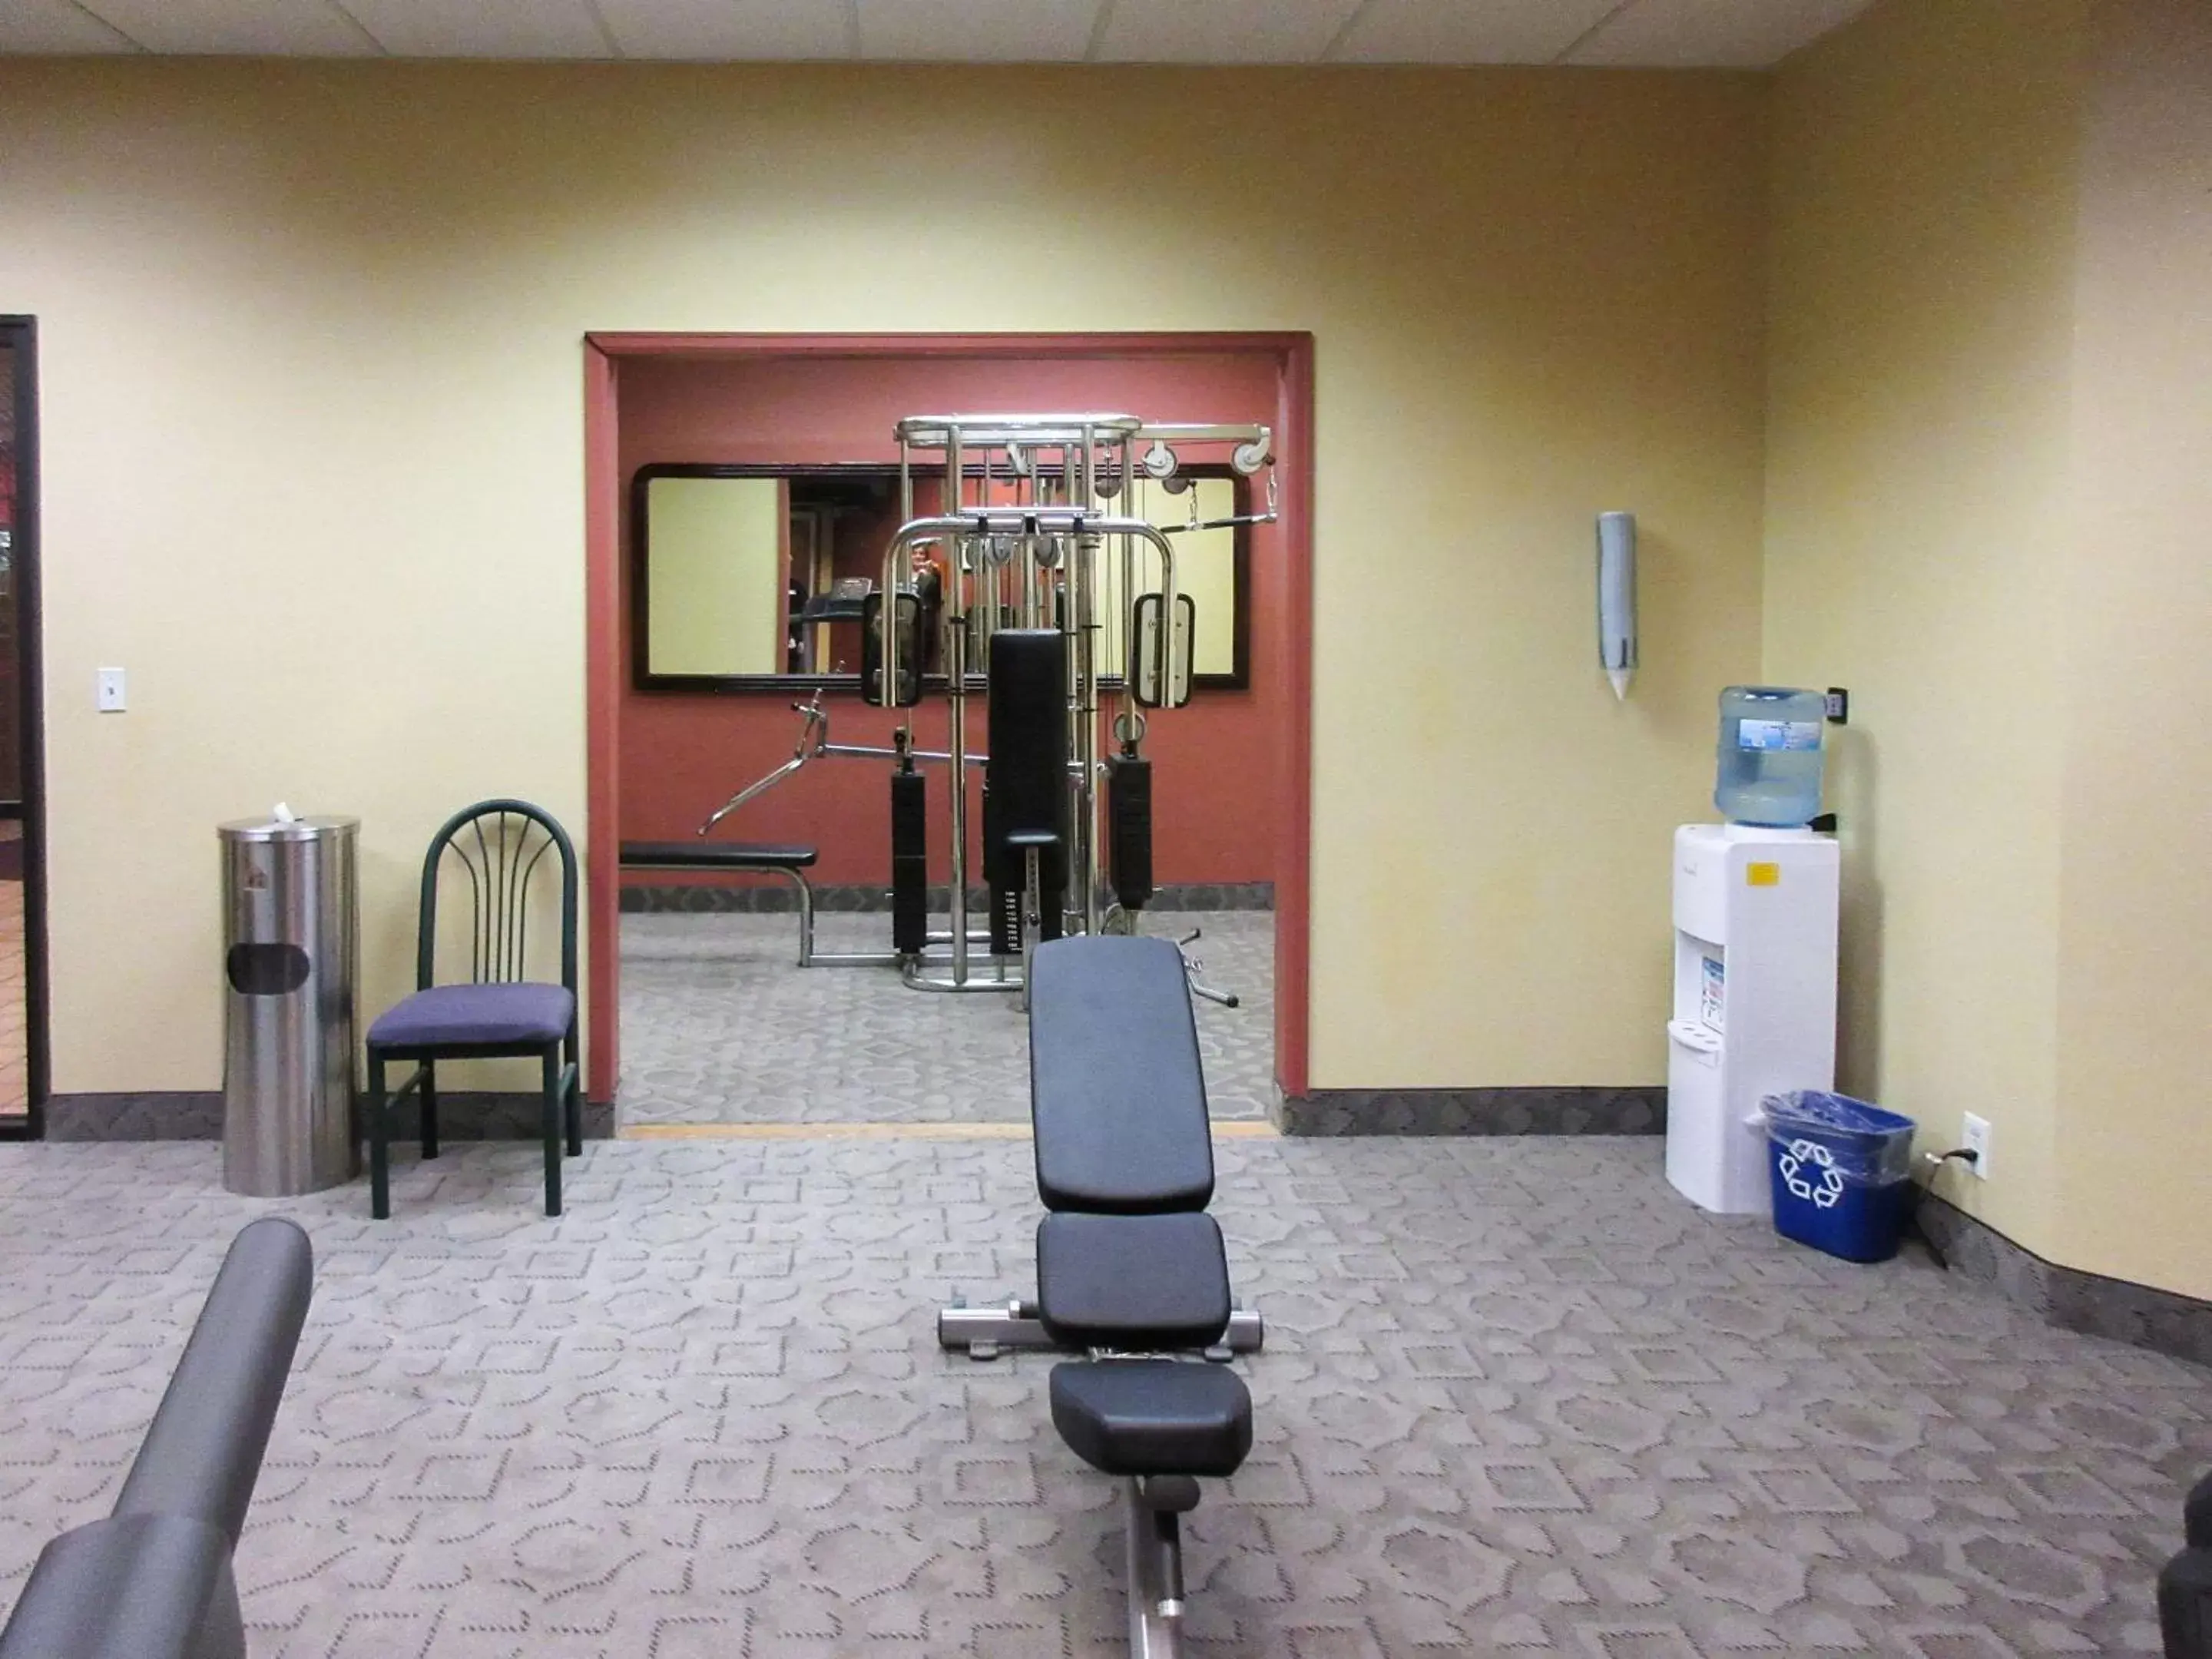 Fitness centre/facilities, Fitness Center/Facilities in Clarion Inn Fort Collins